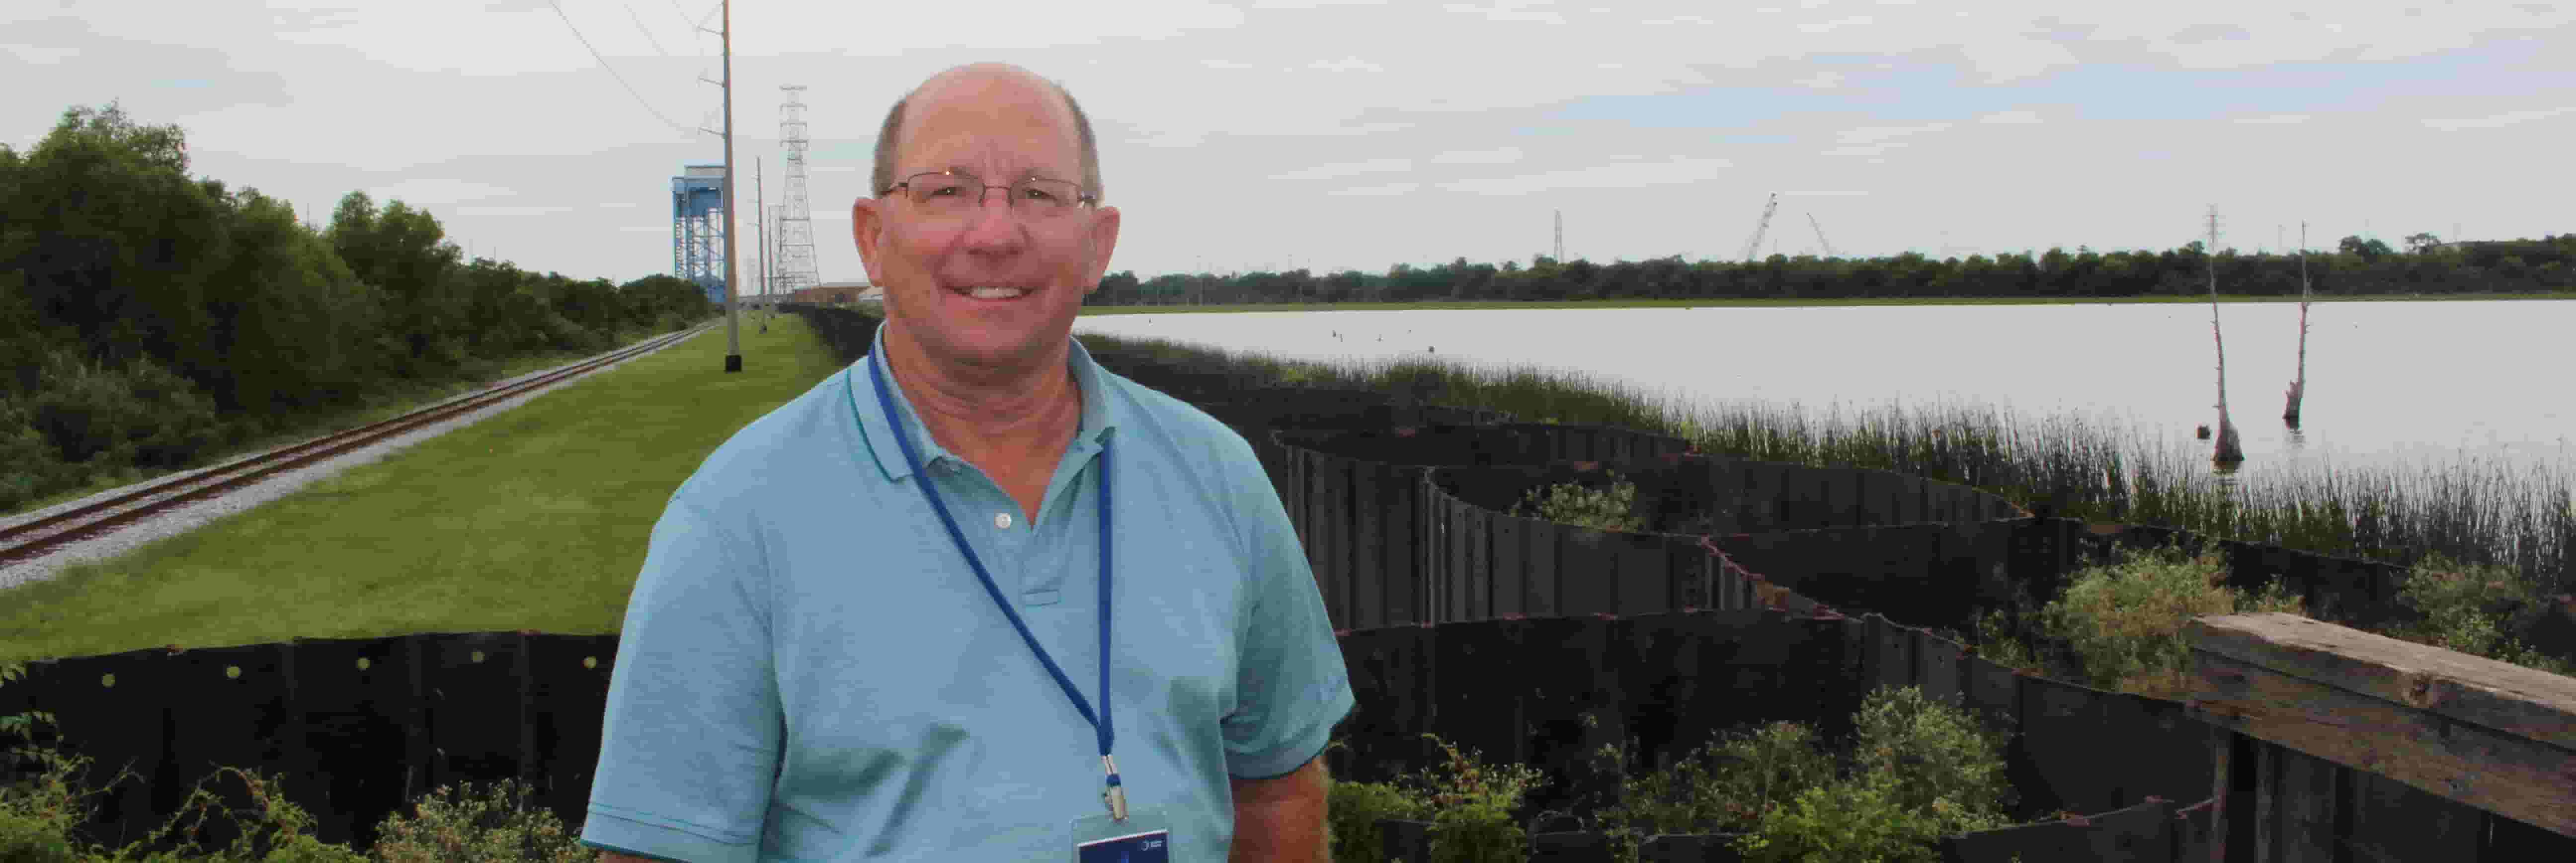 One Water Iowa delegate Ray Gaesser, owner and operator of Gaesser Farms, IAWA Conservation Infrastructure co-chair